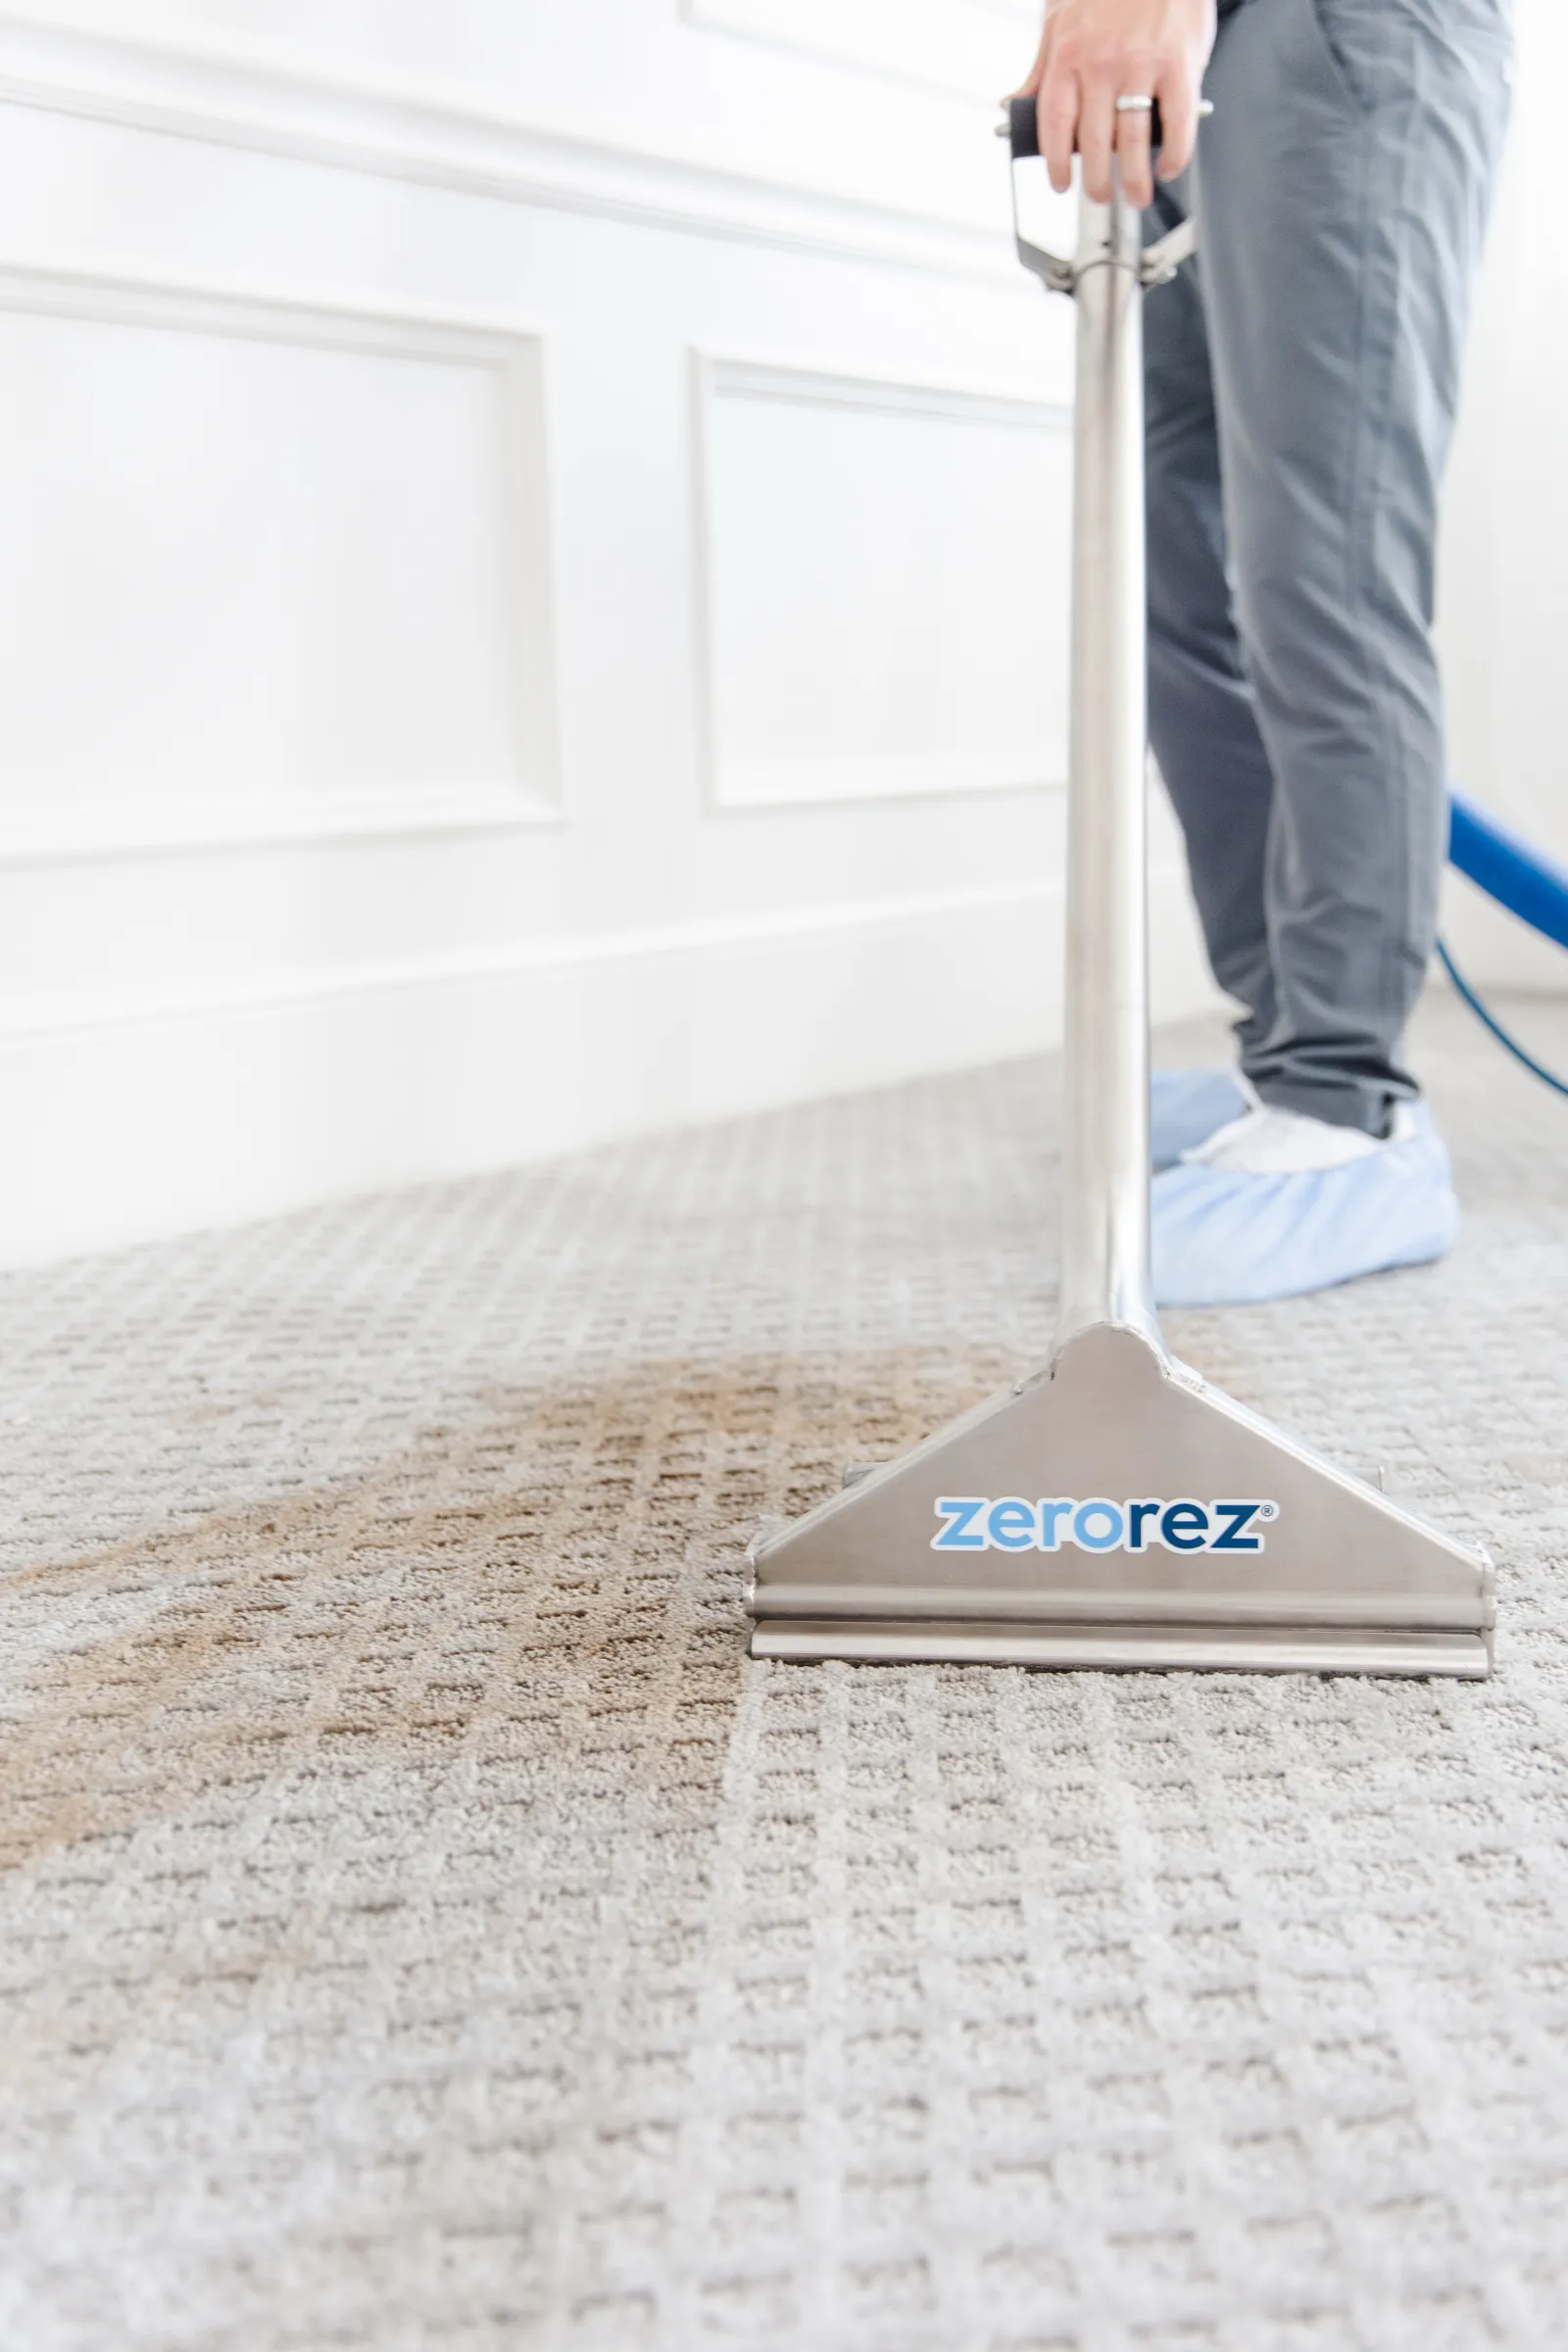 Zerorez helps prevent carpet wicking stains with its patented Zr Wand® which doesn't flood carpets